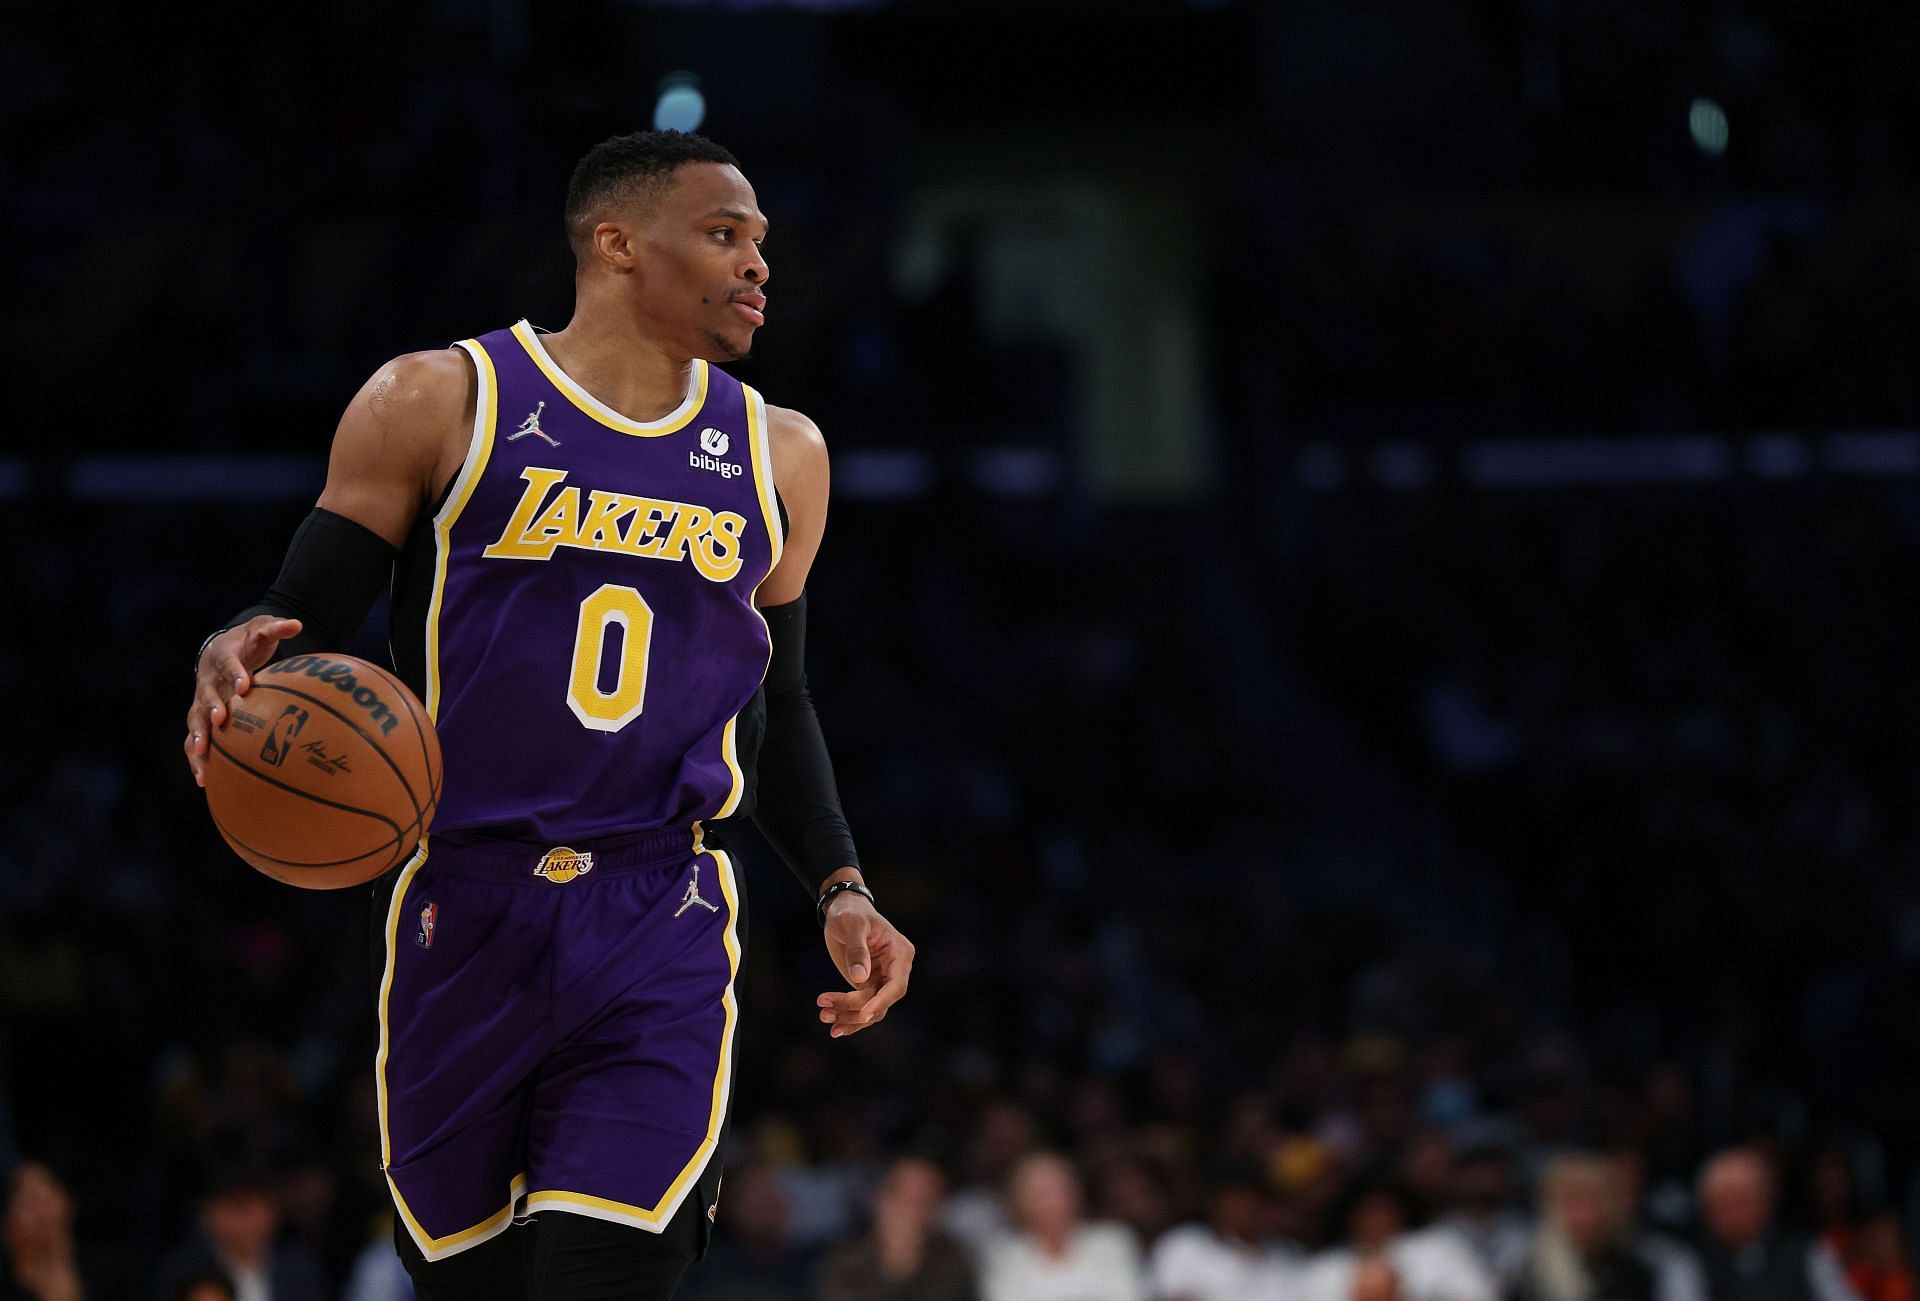 Russell Westbrook #0 of the LA Lakers.